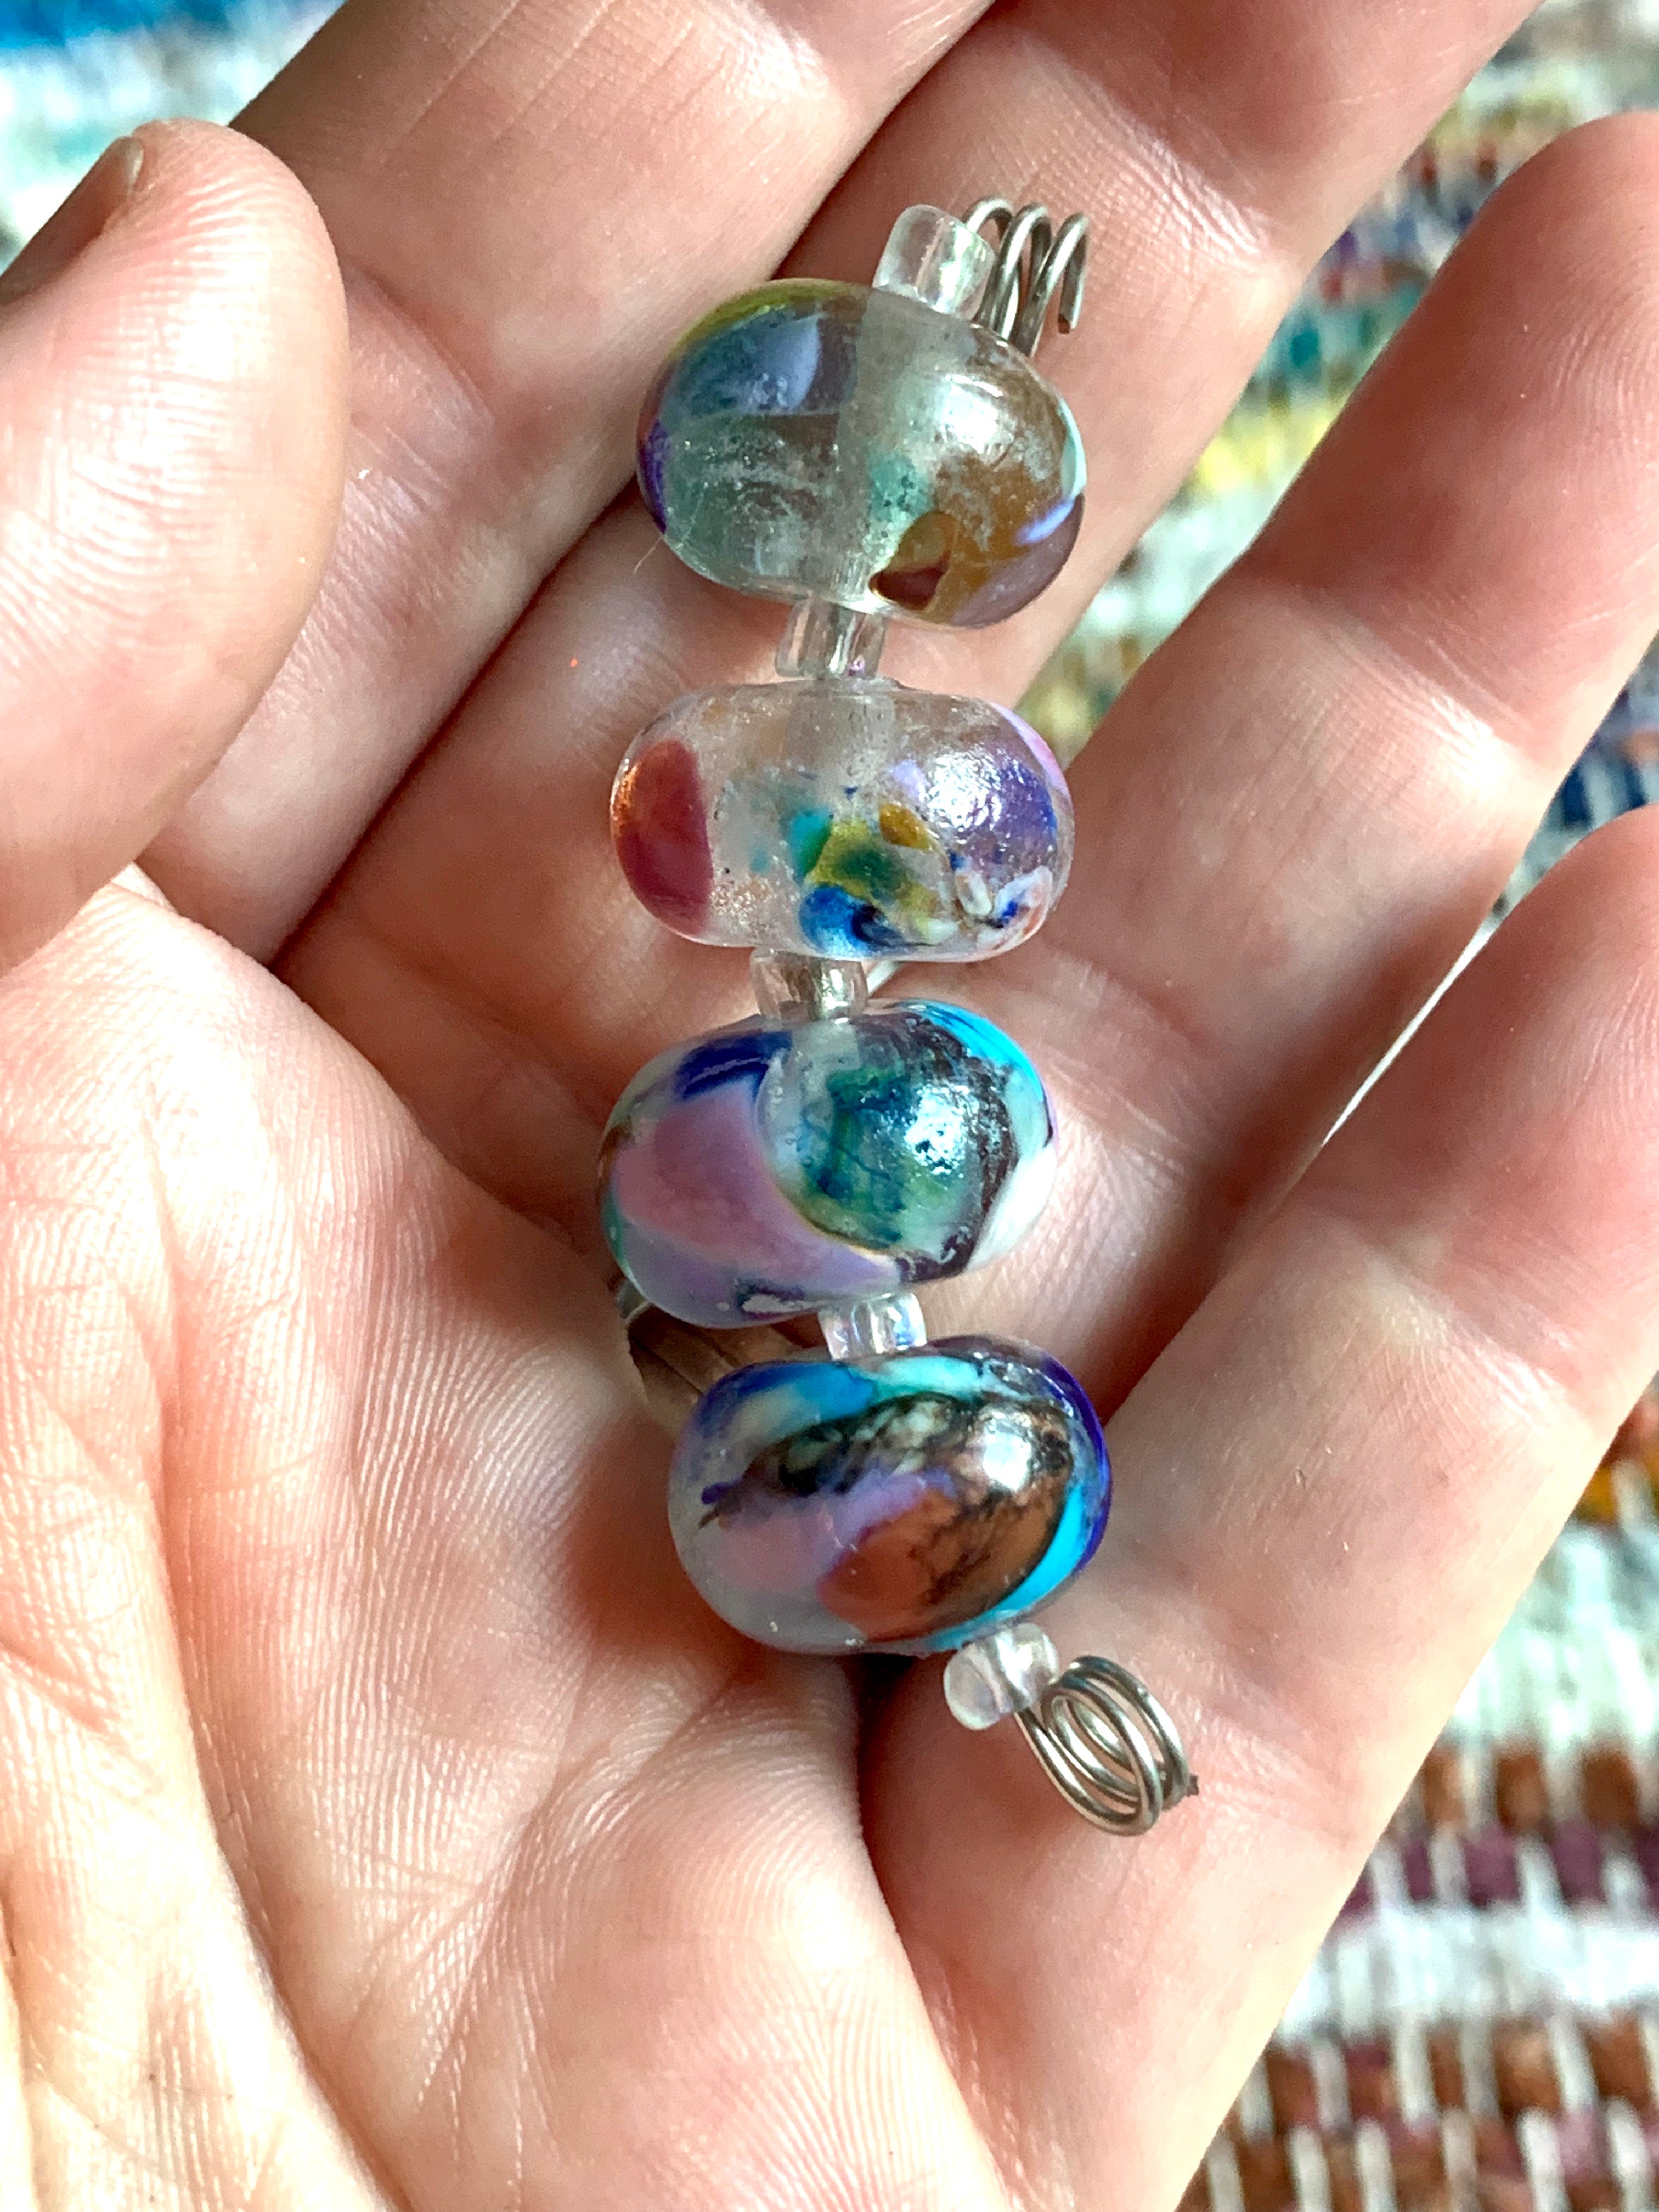 Set of 4 “watercolor” glass beads with brightly colored spots and swirls